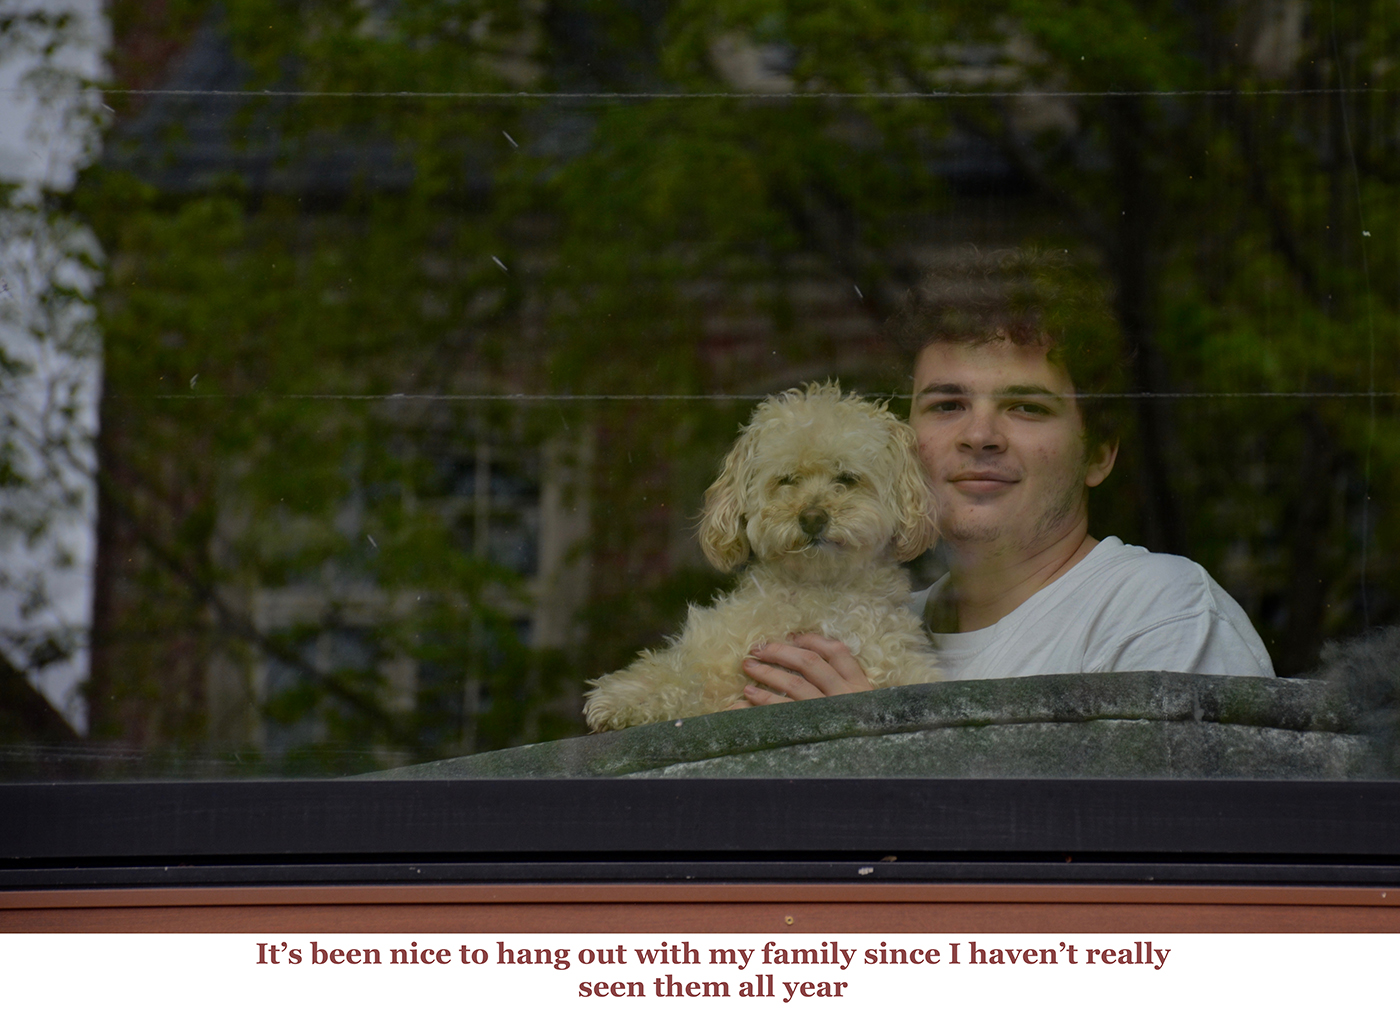 photo of person and dog at window